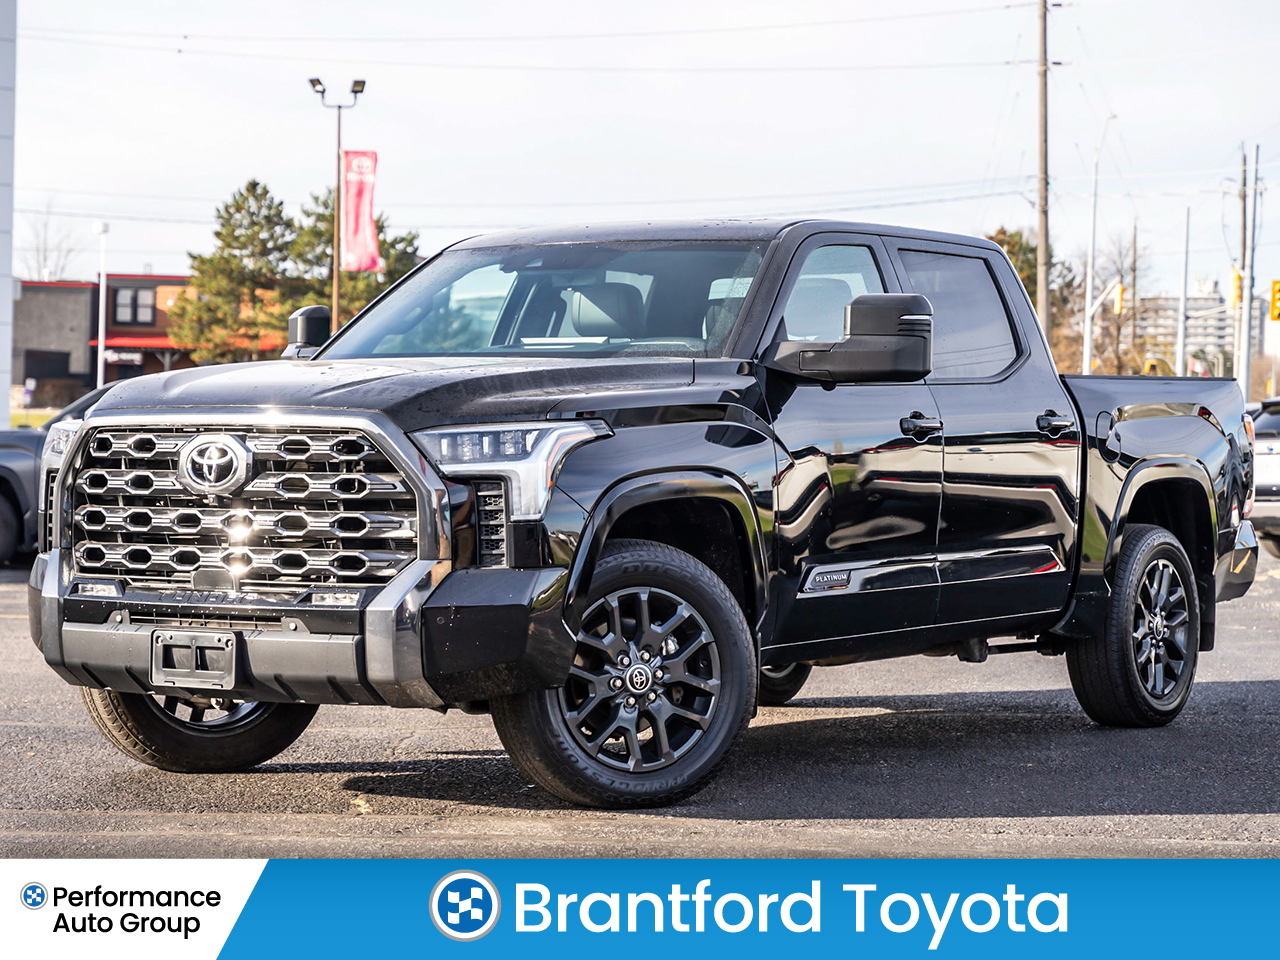 2022 Toyota Tundra SOLD - KEEP CHECKING BACK FOR INCOMING TUNDRA'S